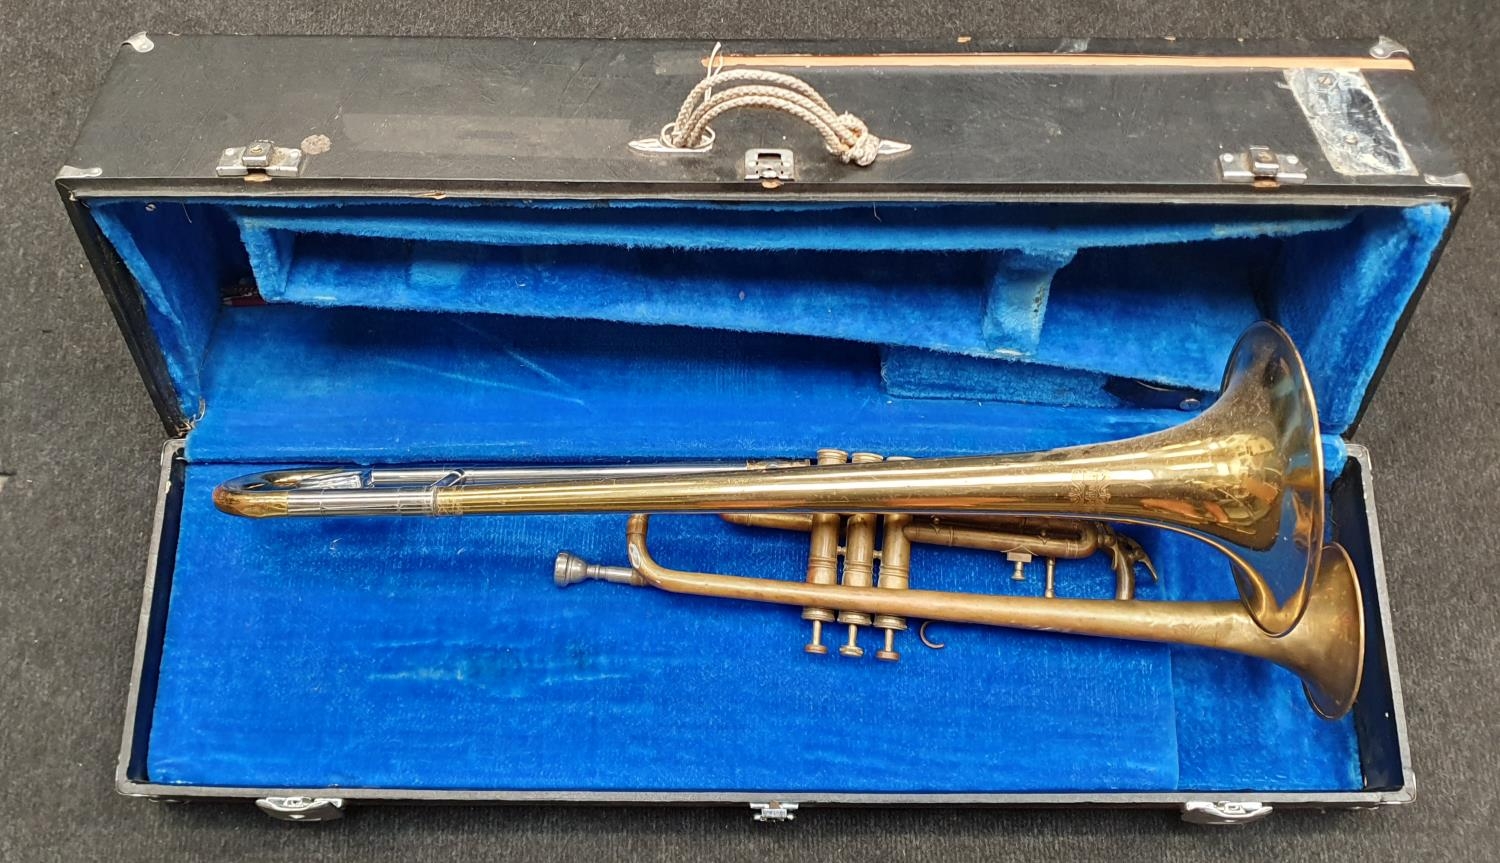 Artist trombone in case together with a trumpet.